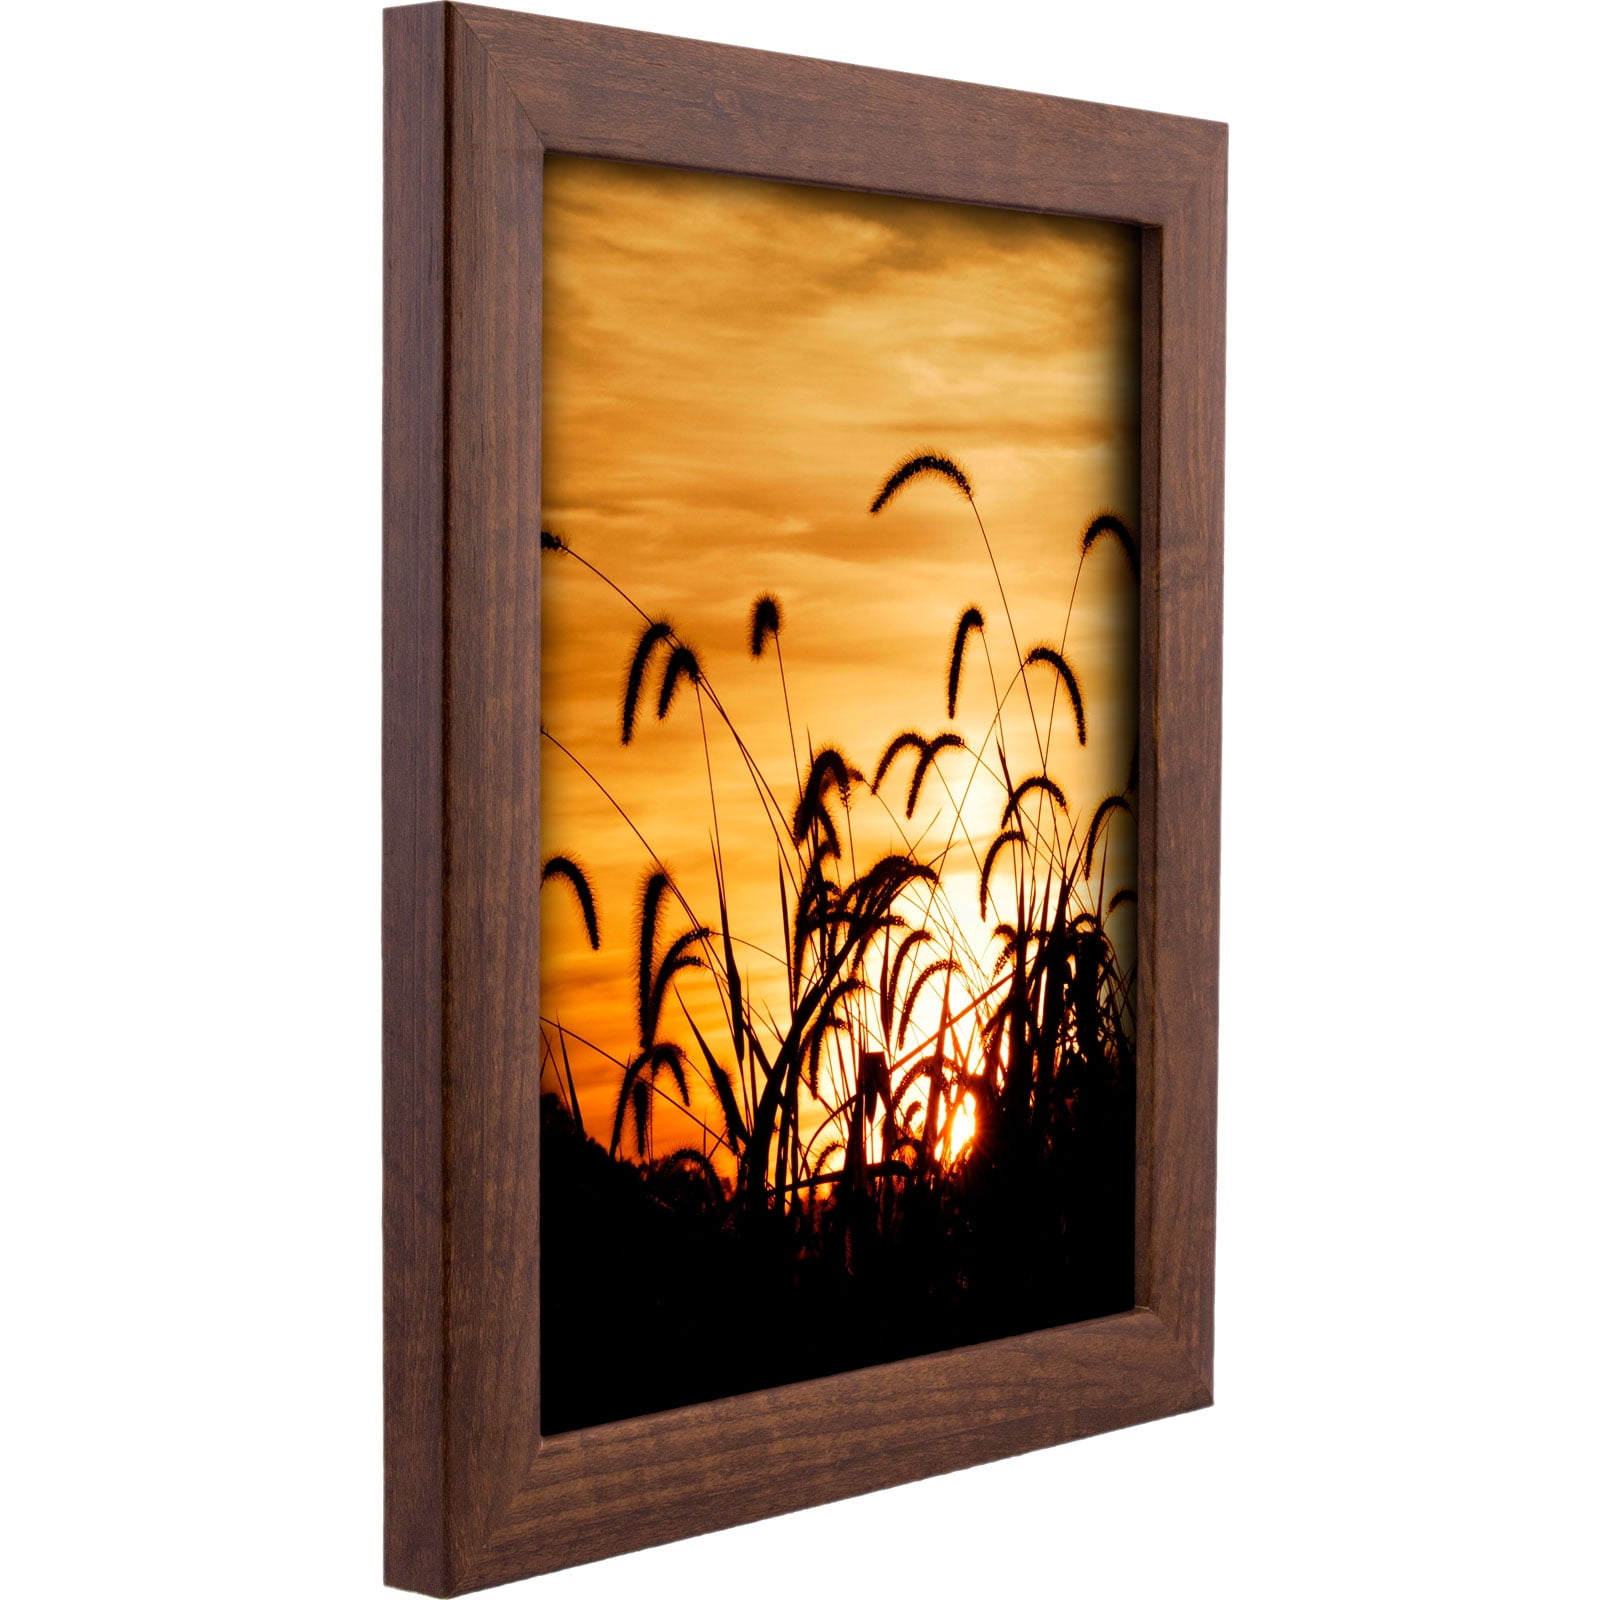 23247616 11x14 Walnut Brown Picture Frame Matted to Display a 8x10 Photo 